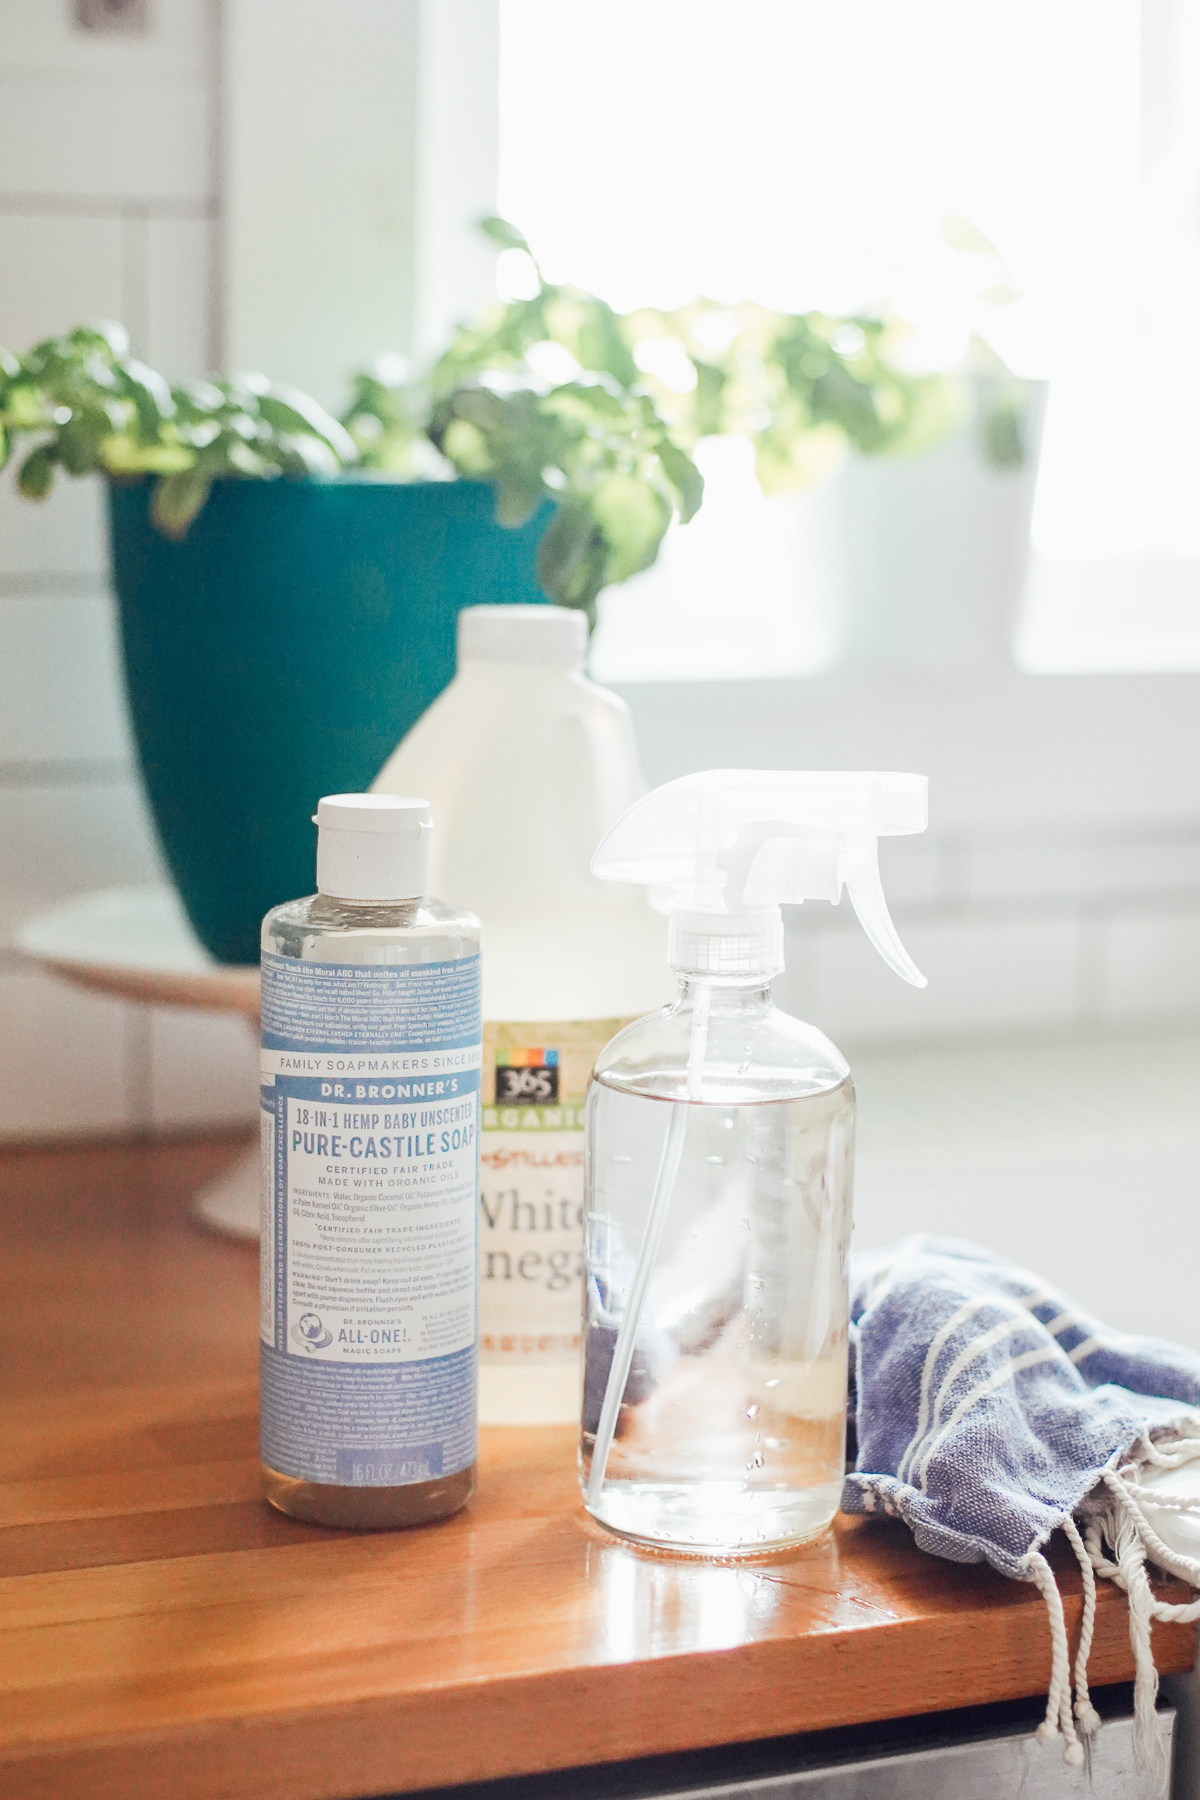 All purpose cleaner spray made with castile soap in a clear glass spray bottle.